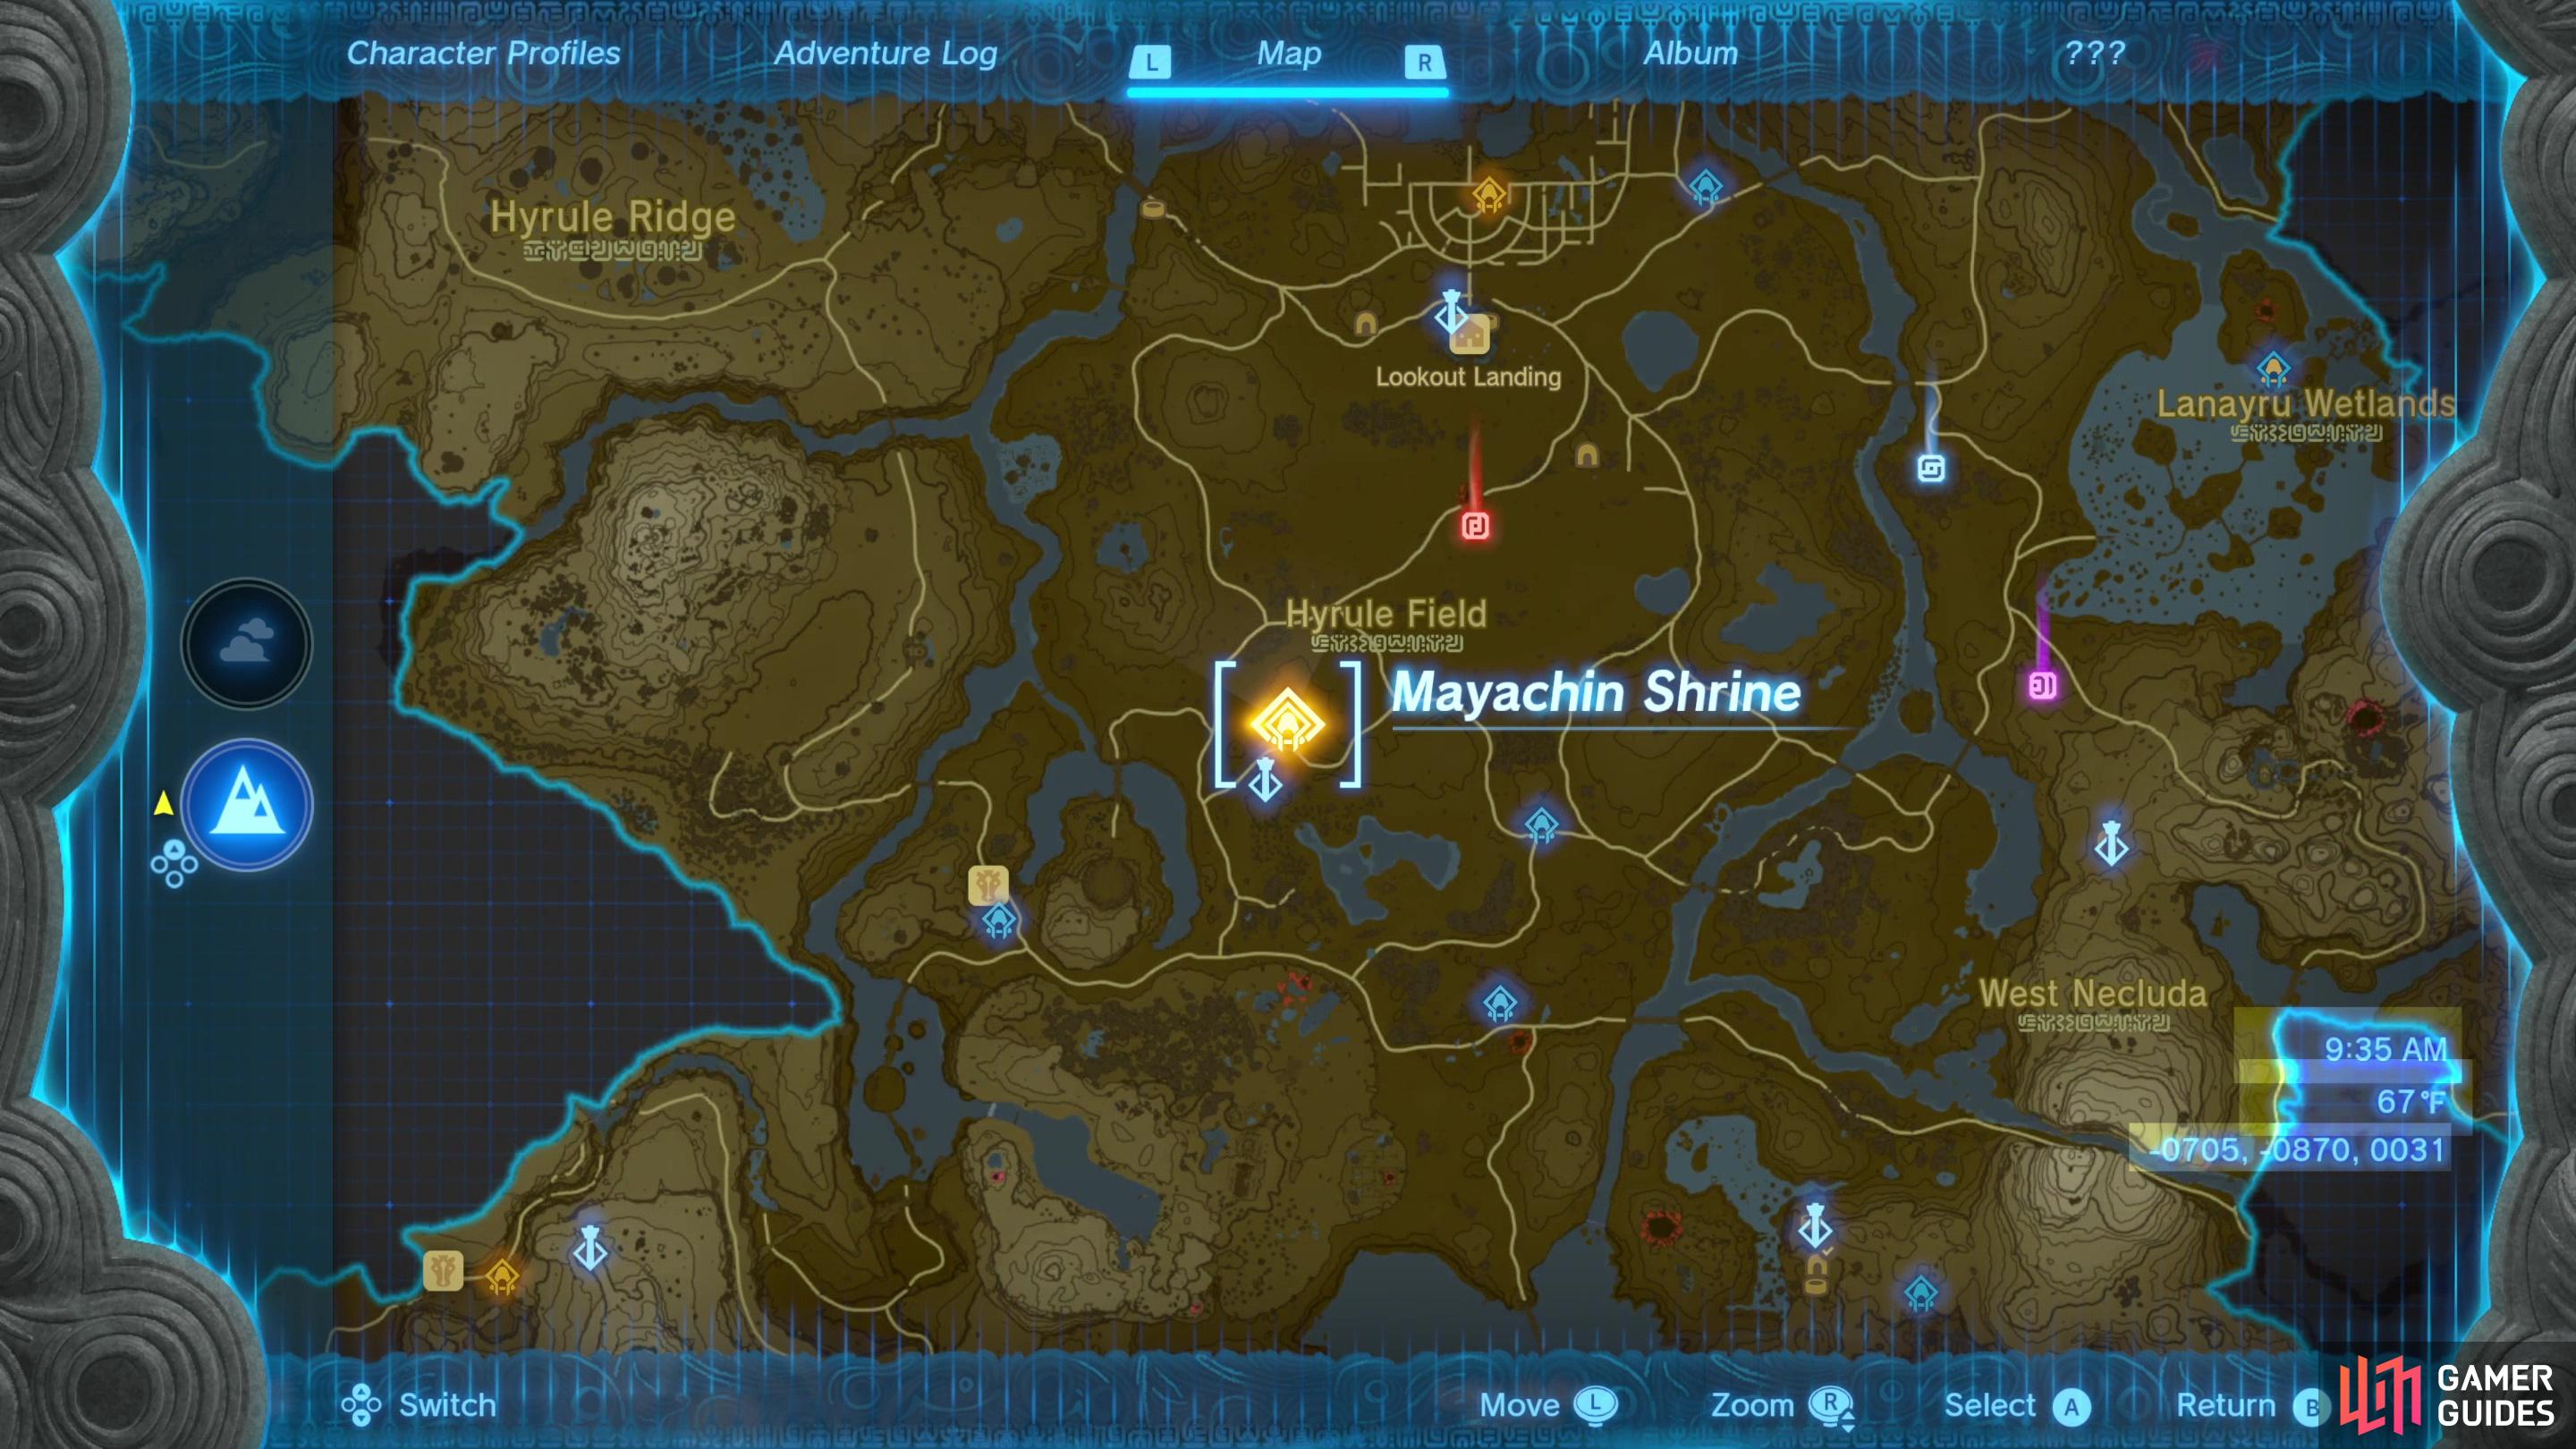 Mayachin Shrine can be found in the southwestern edge of Central Hyrule, near Hyrule Field Skyview Tower.